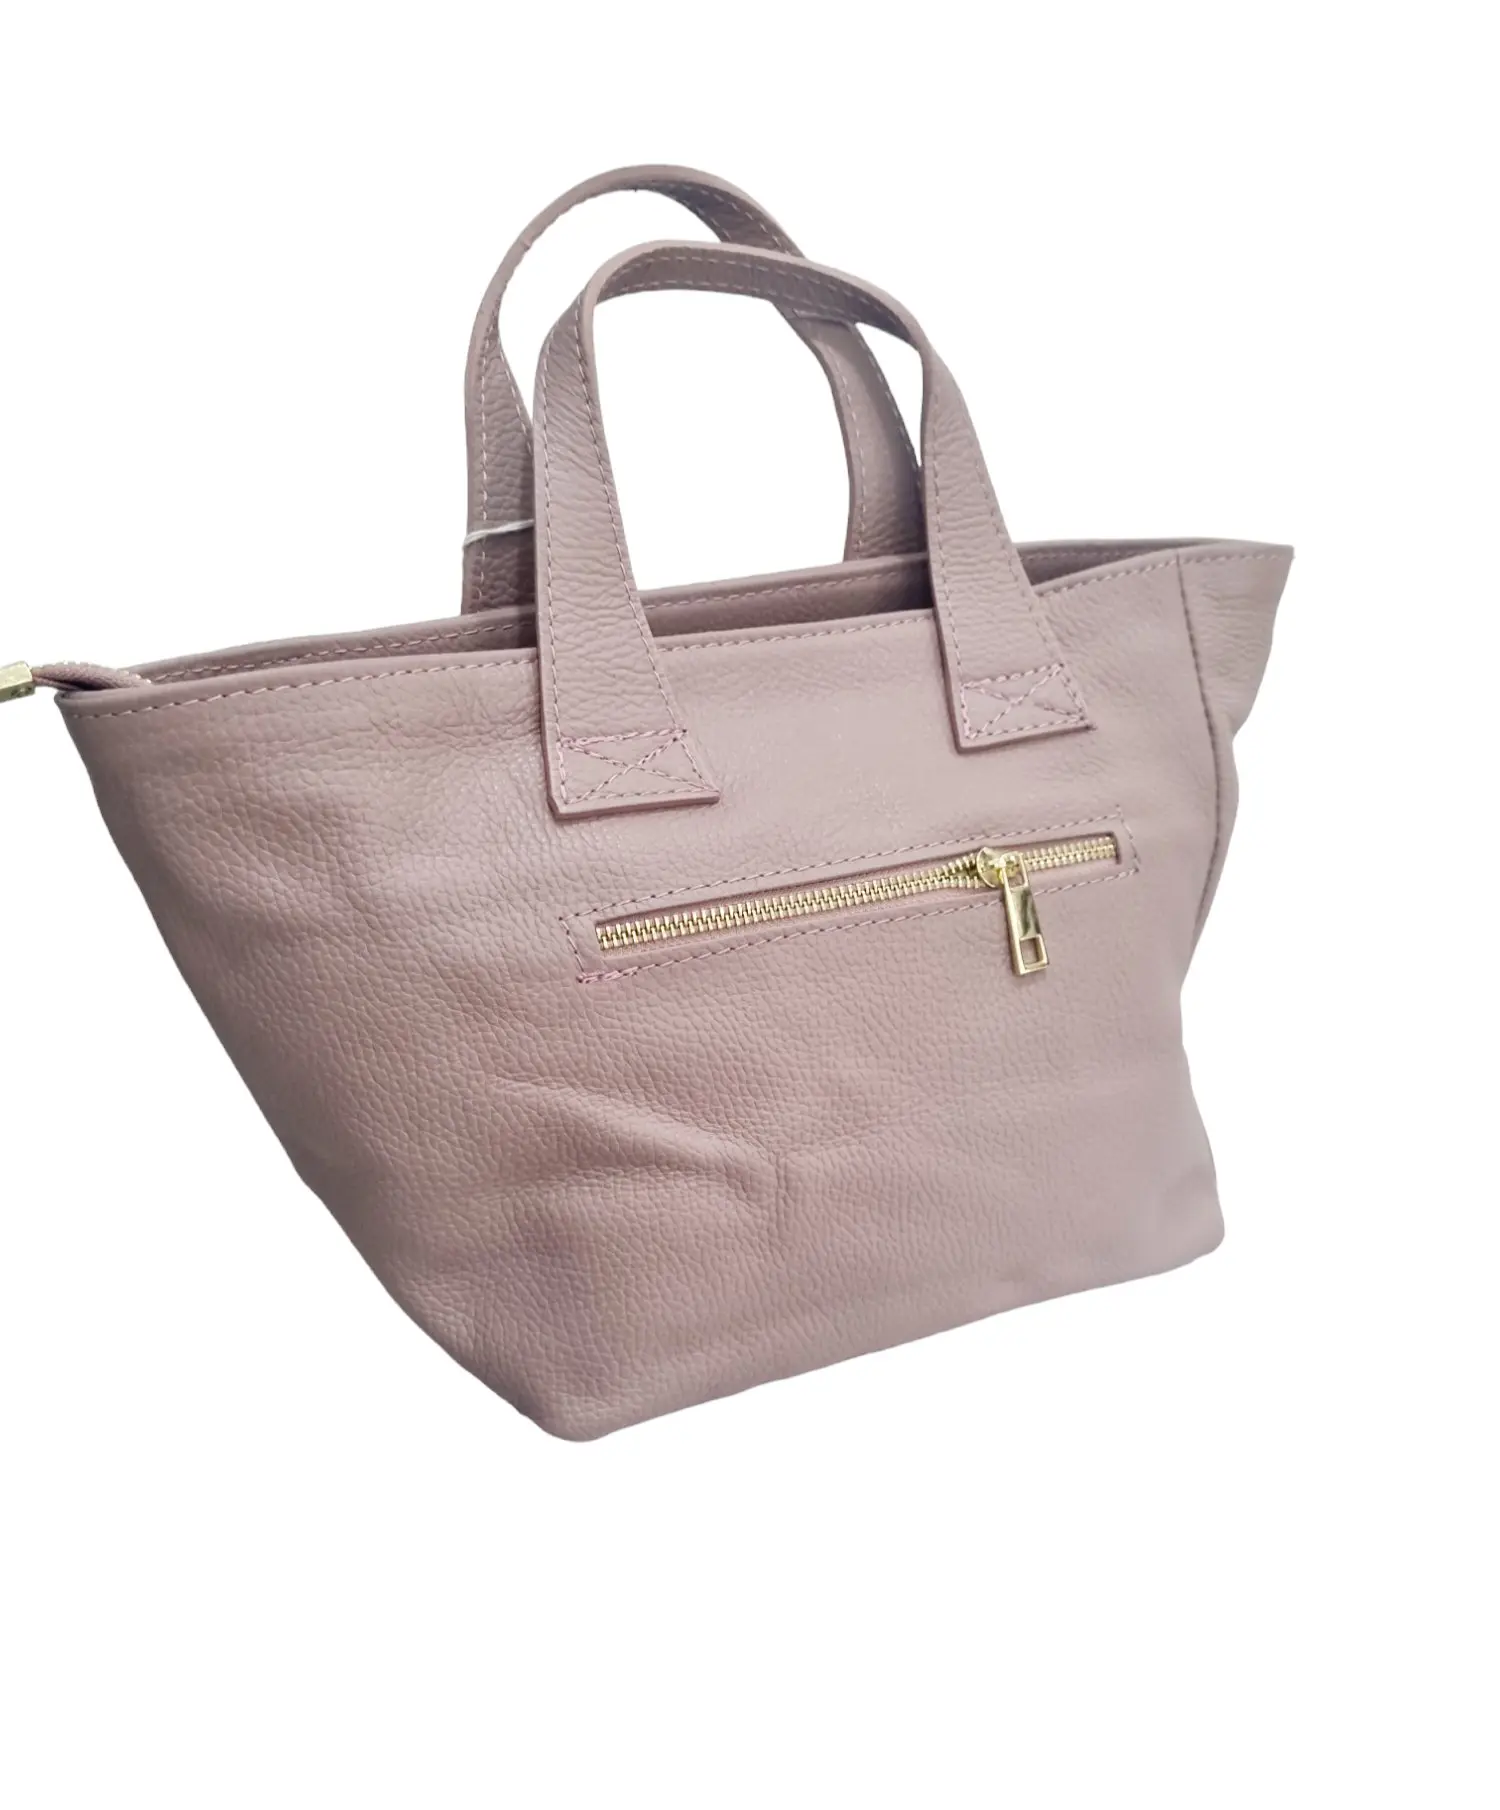 Genuine leather bag, made in Italy, powder pink, with external zip pocket. internal zip closure single lined pocket with side pockets. Equipped with shoulder strap. Measures H24 B13 L25